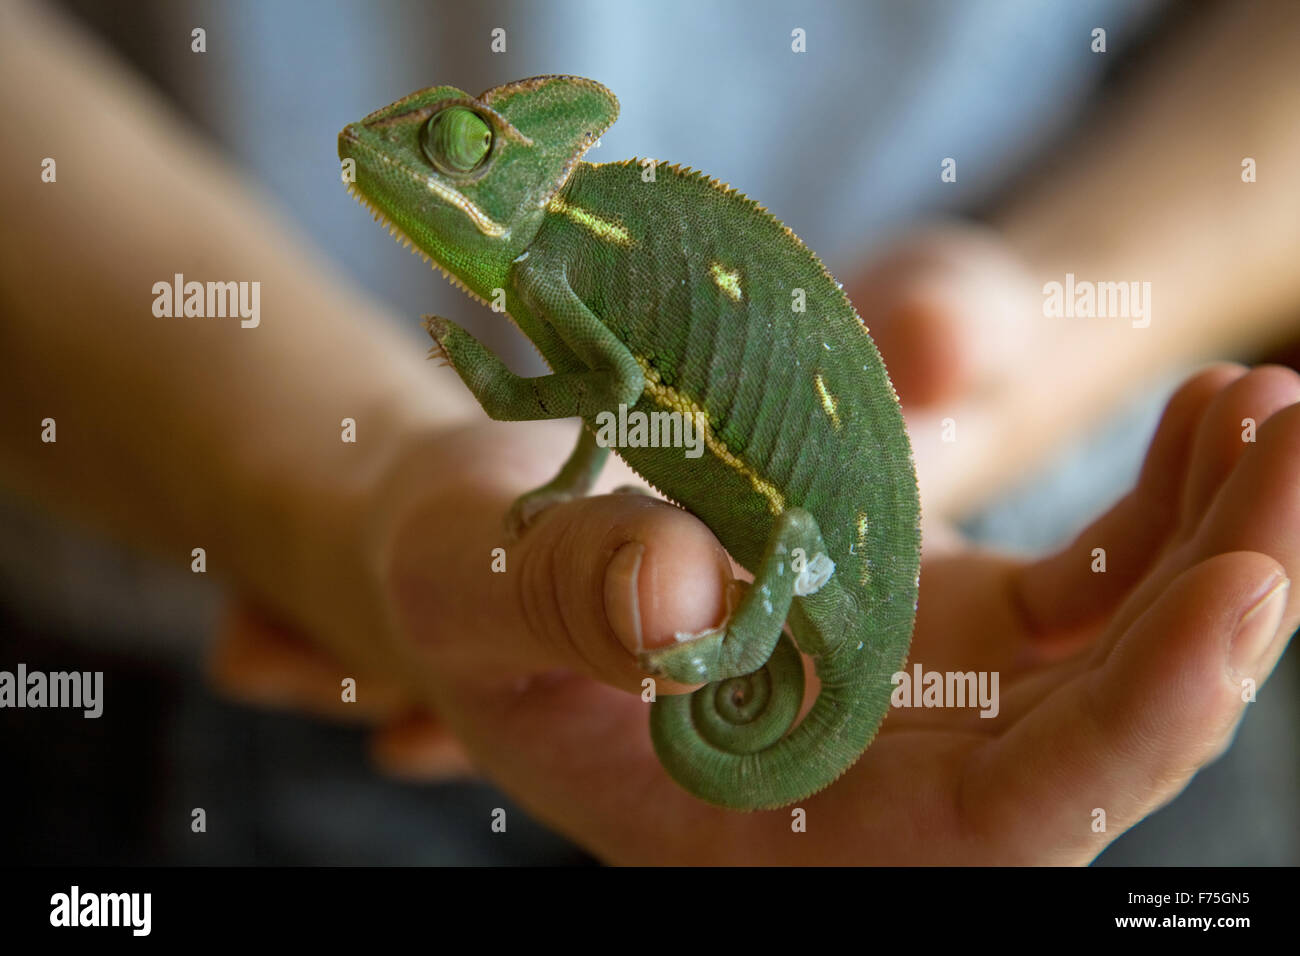 Chameleon in a hand Stock Photo